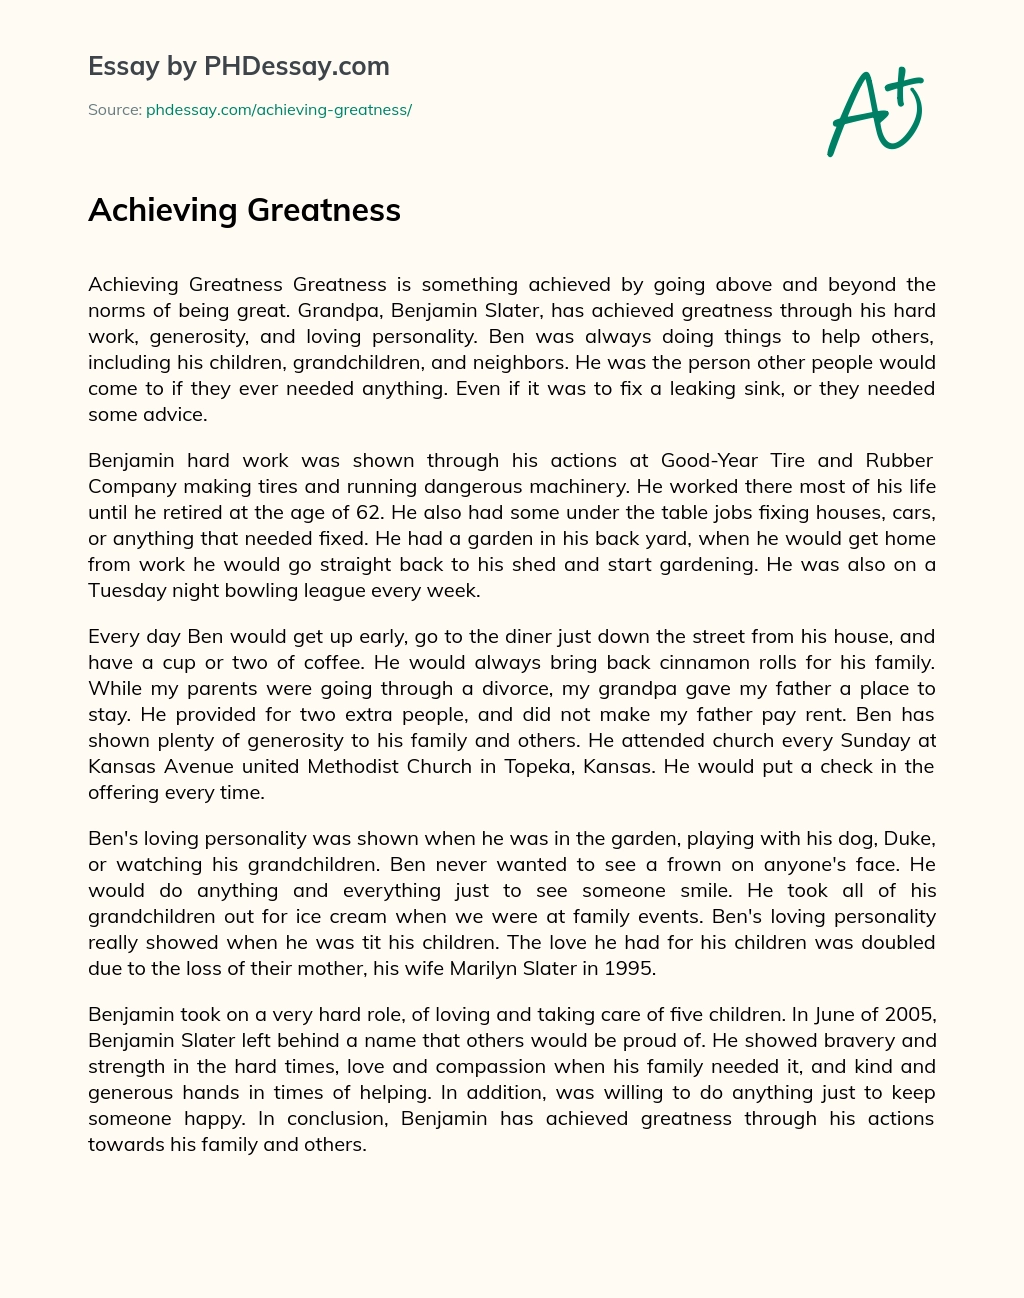 Achieving Greatness essay